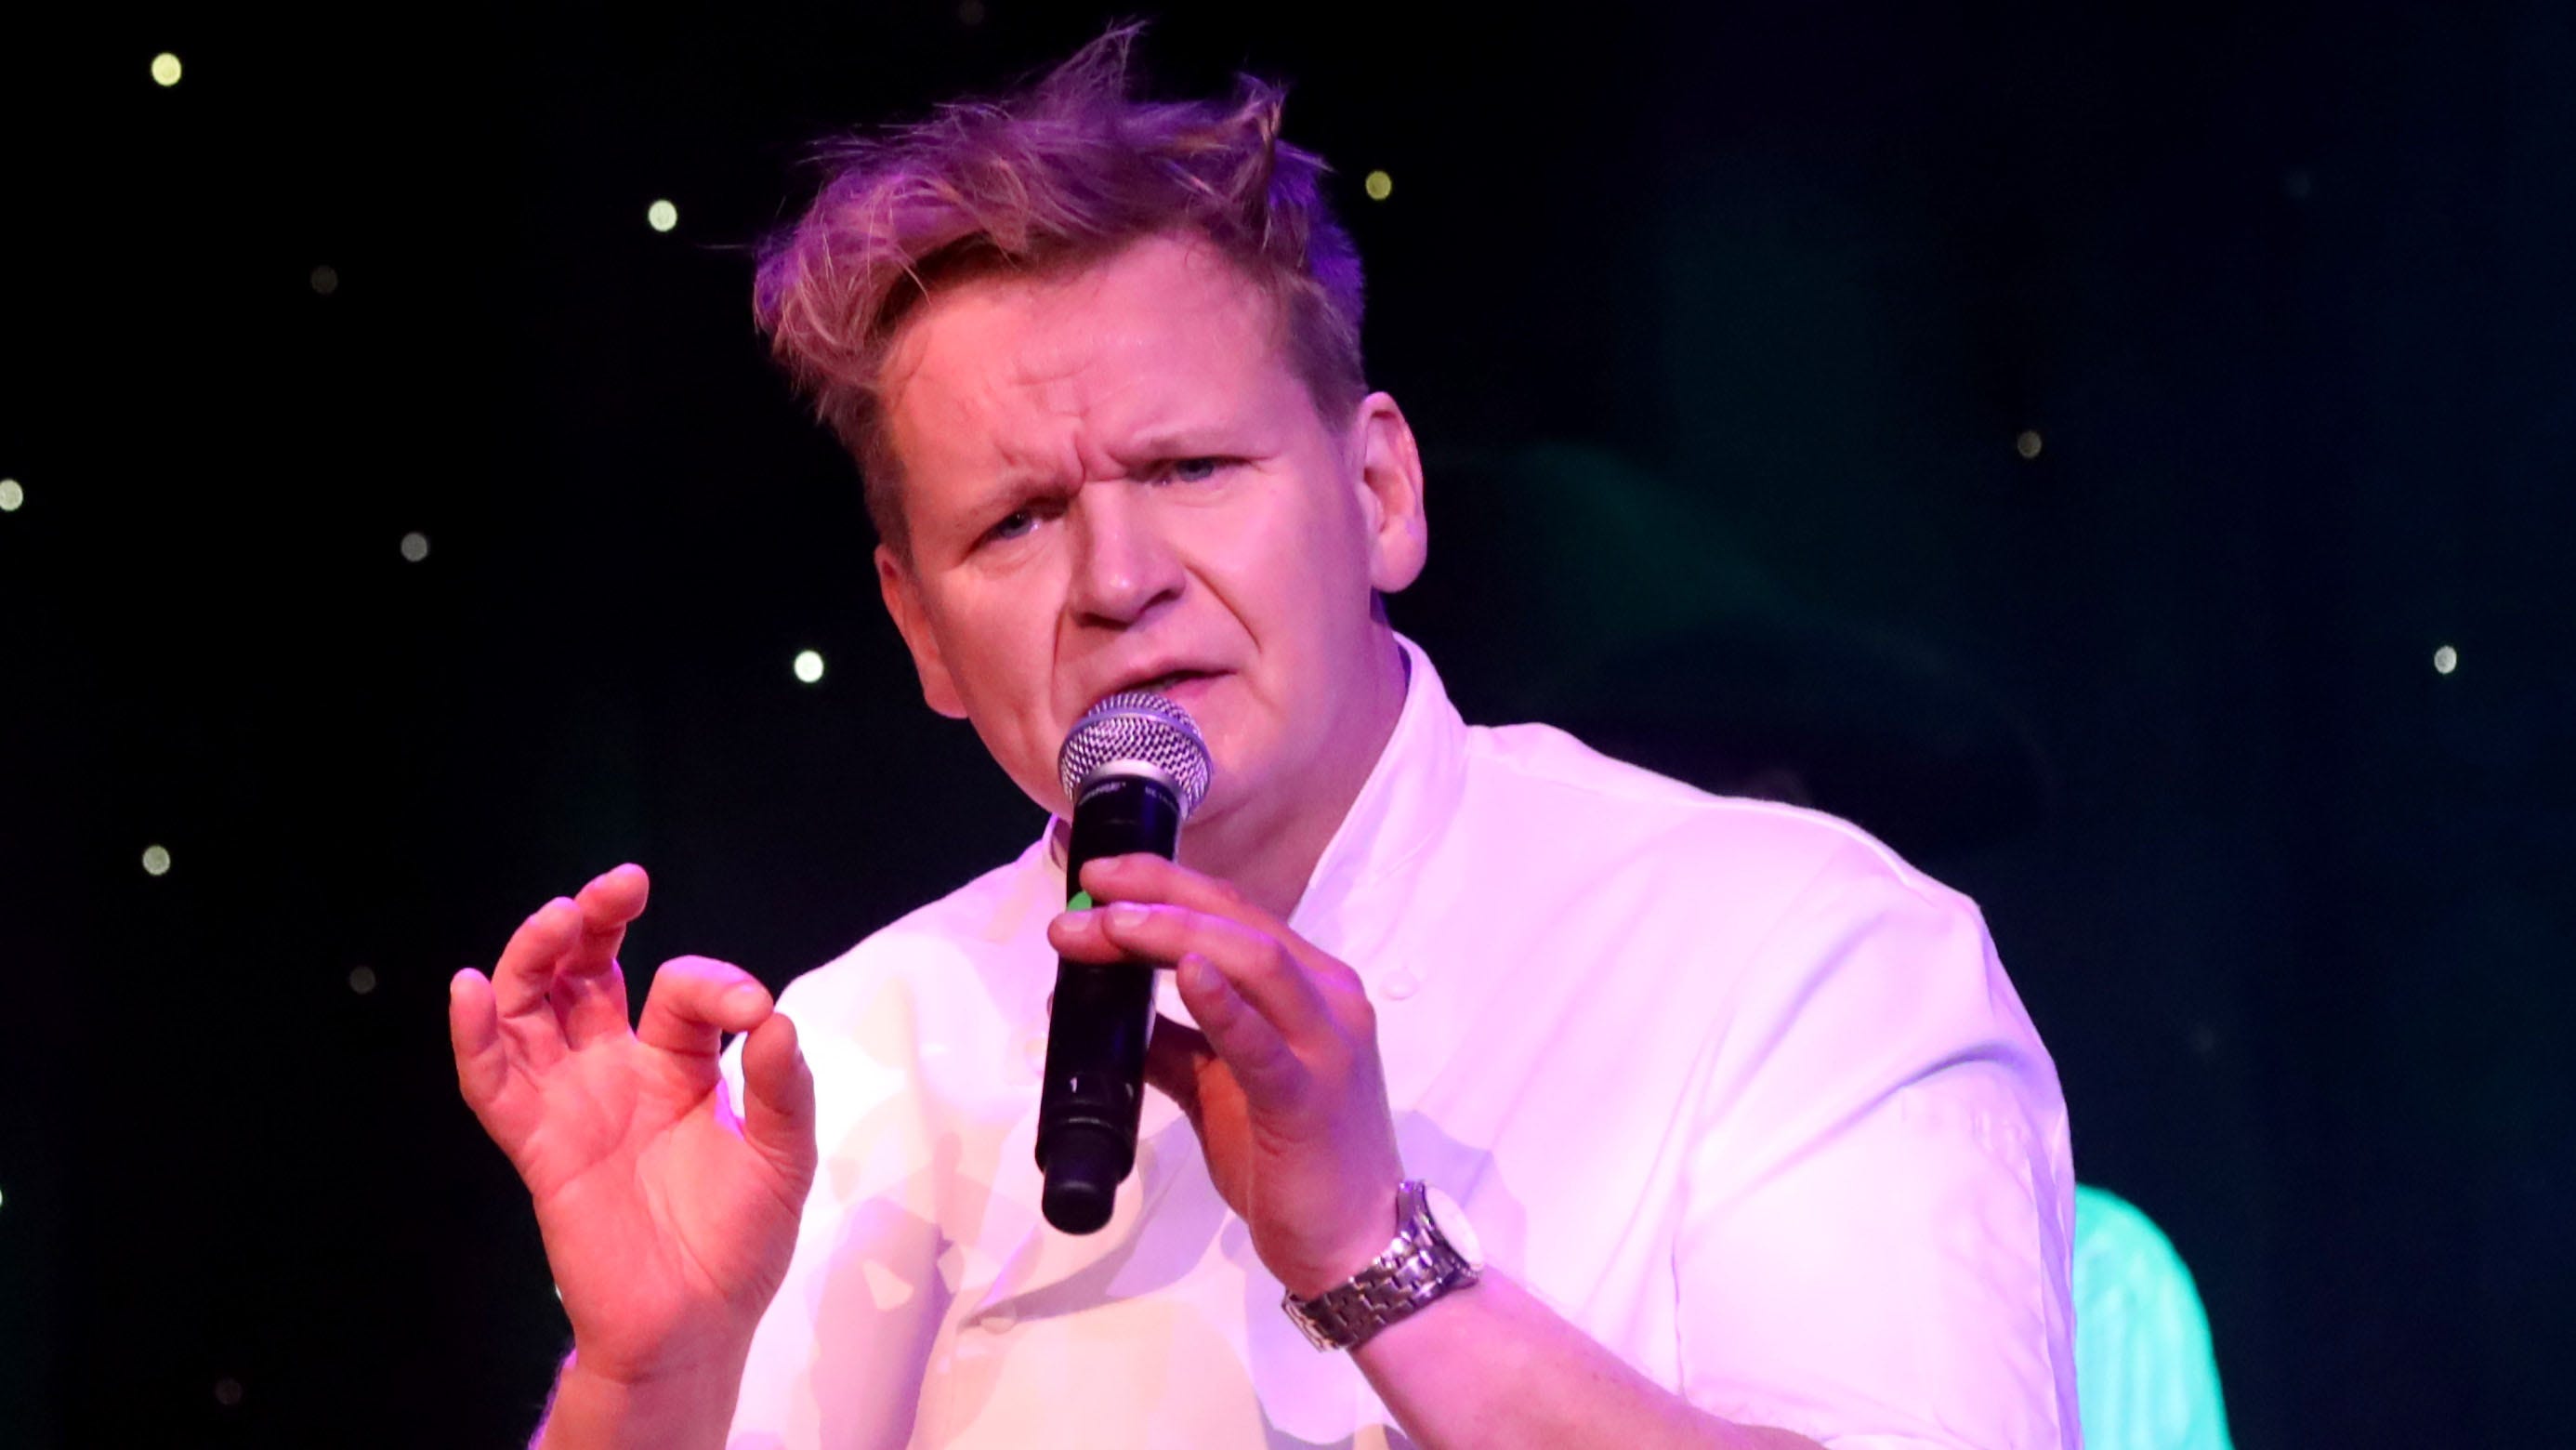 FOX NEWS: Gordon Ramsay’s new restaurant will have $106 burger – and the fries cost extra